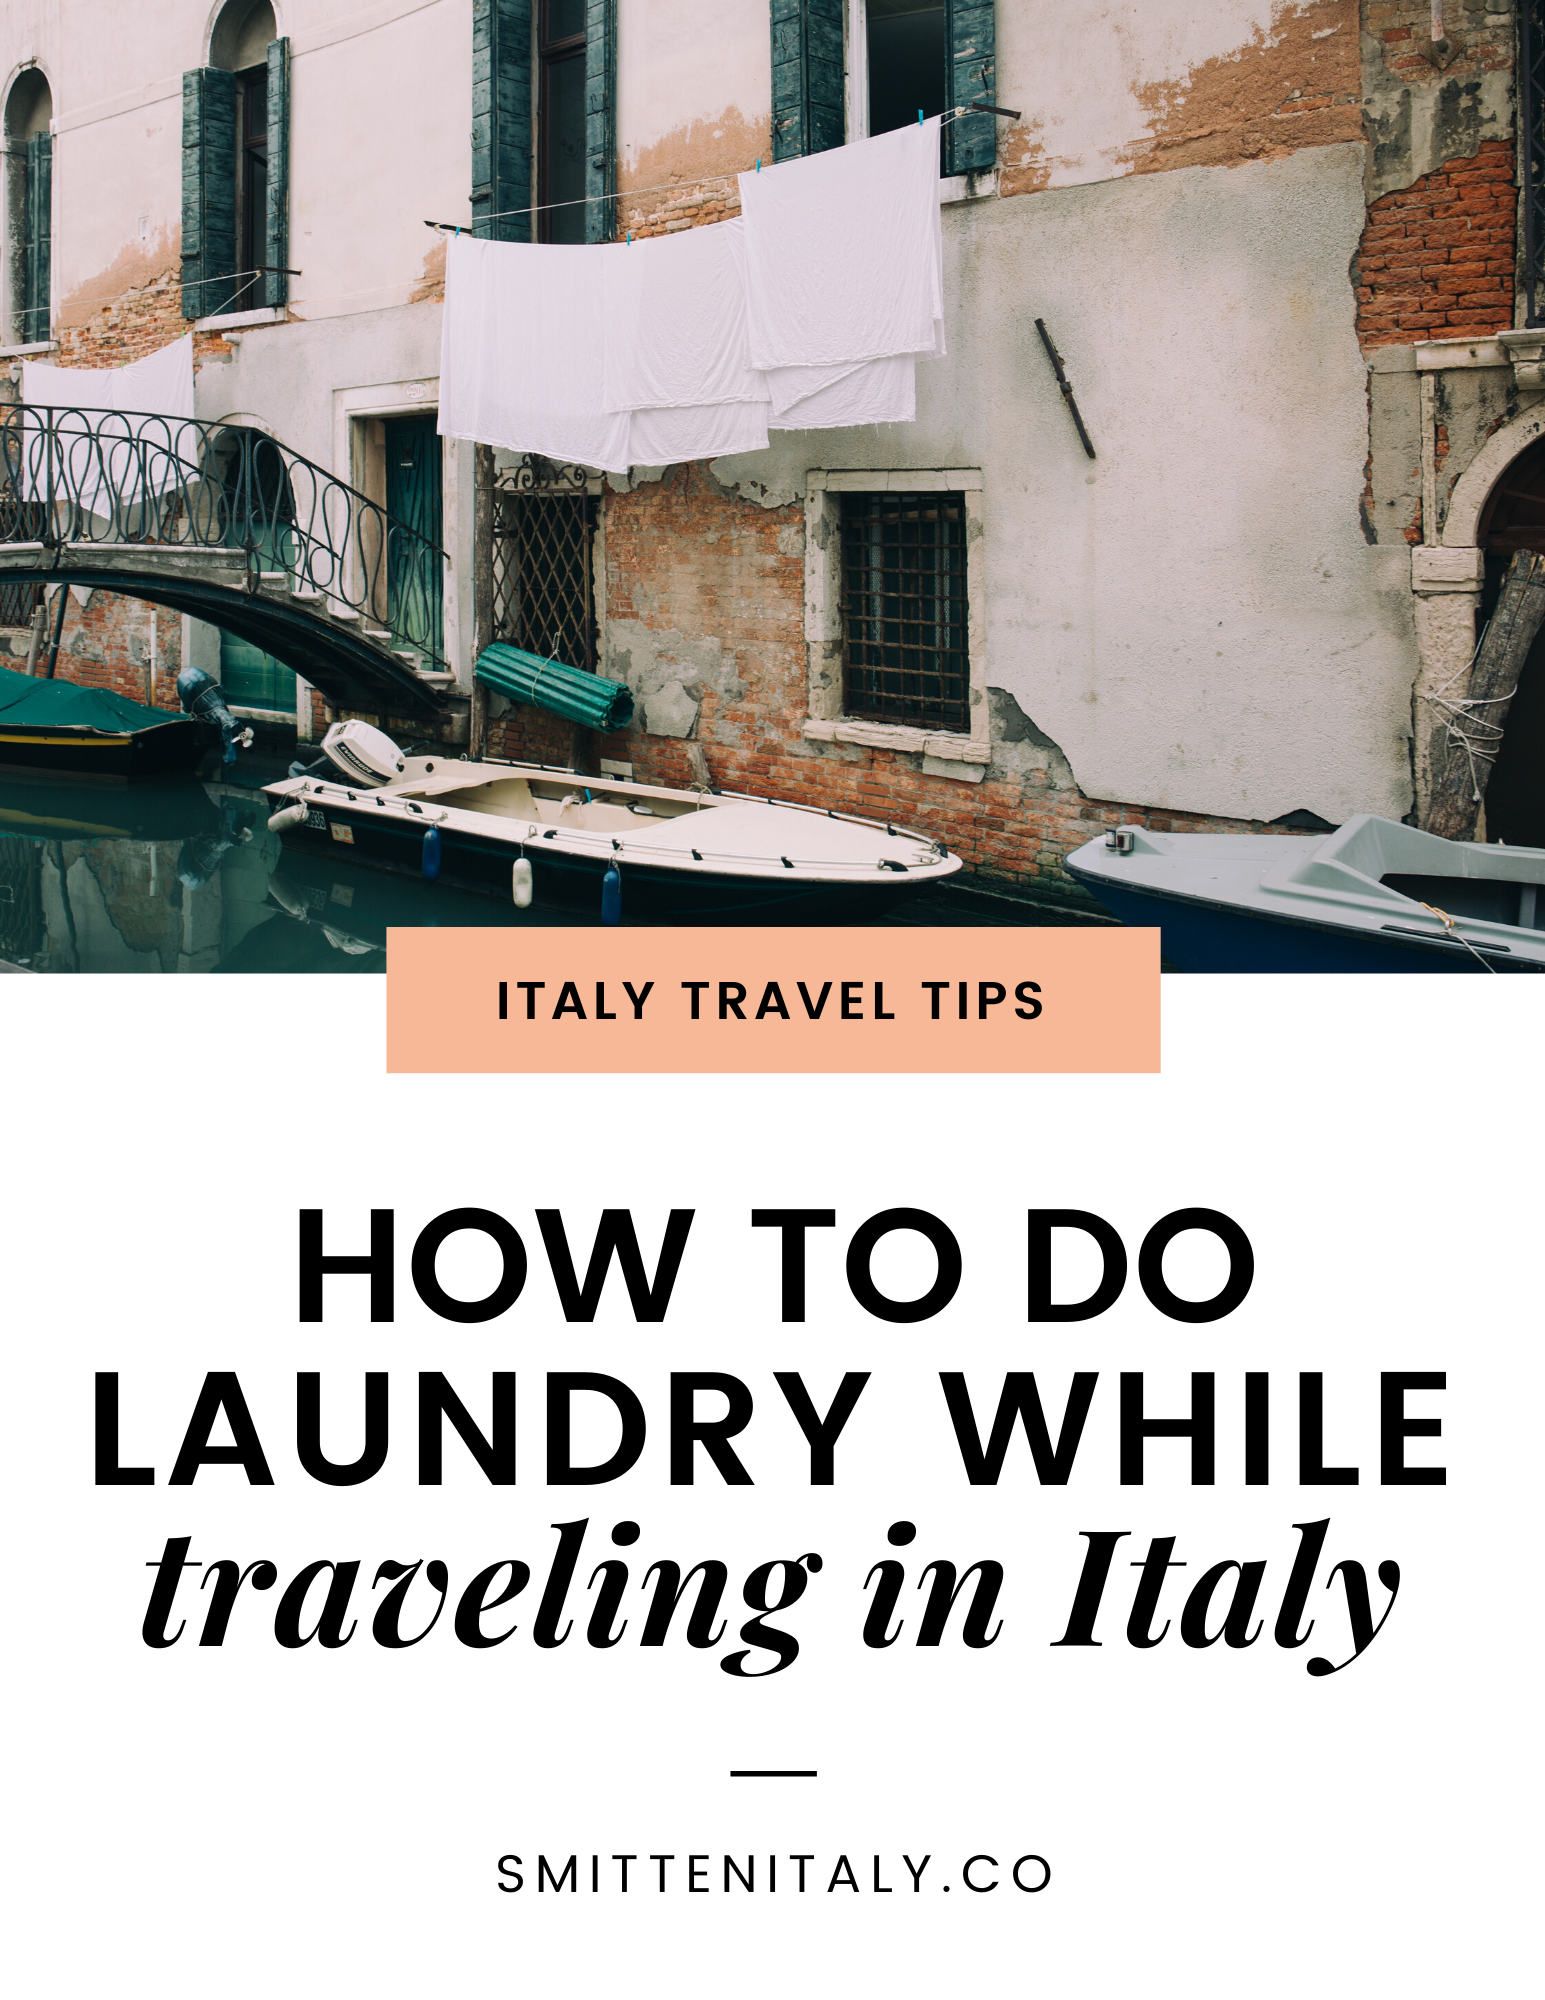 how to do laundry while traveling in Italy